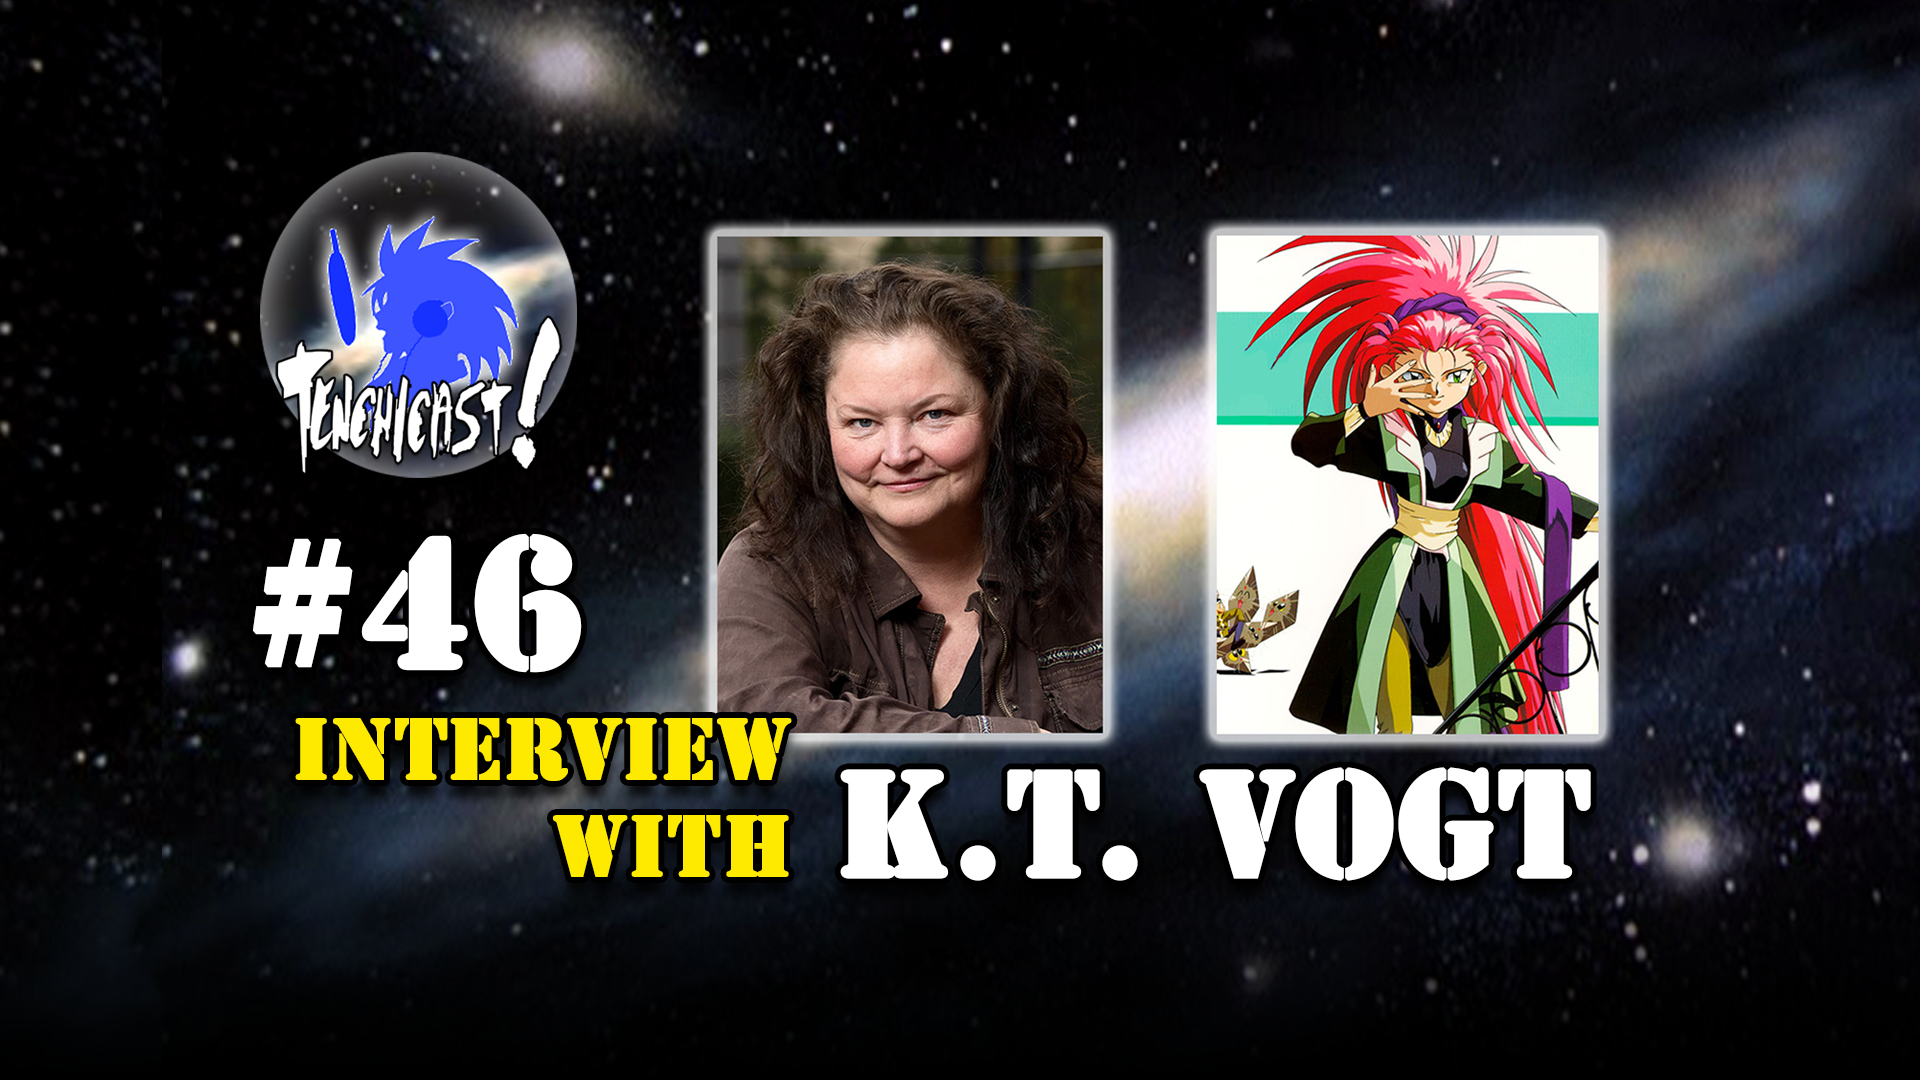 Tenchicast 46: Interview with K.T. Vogt!